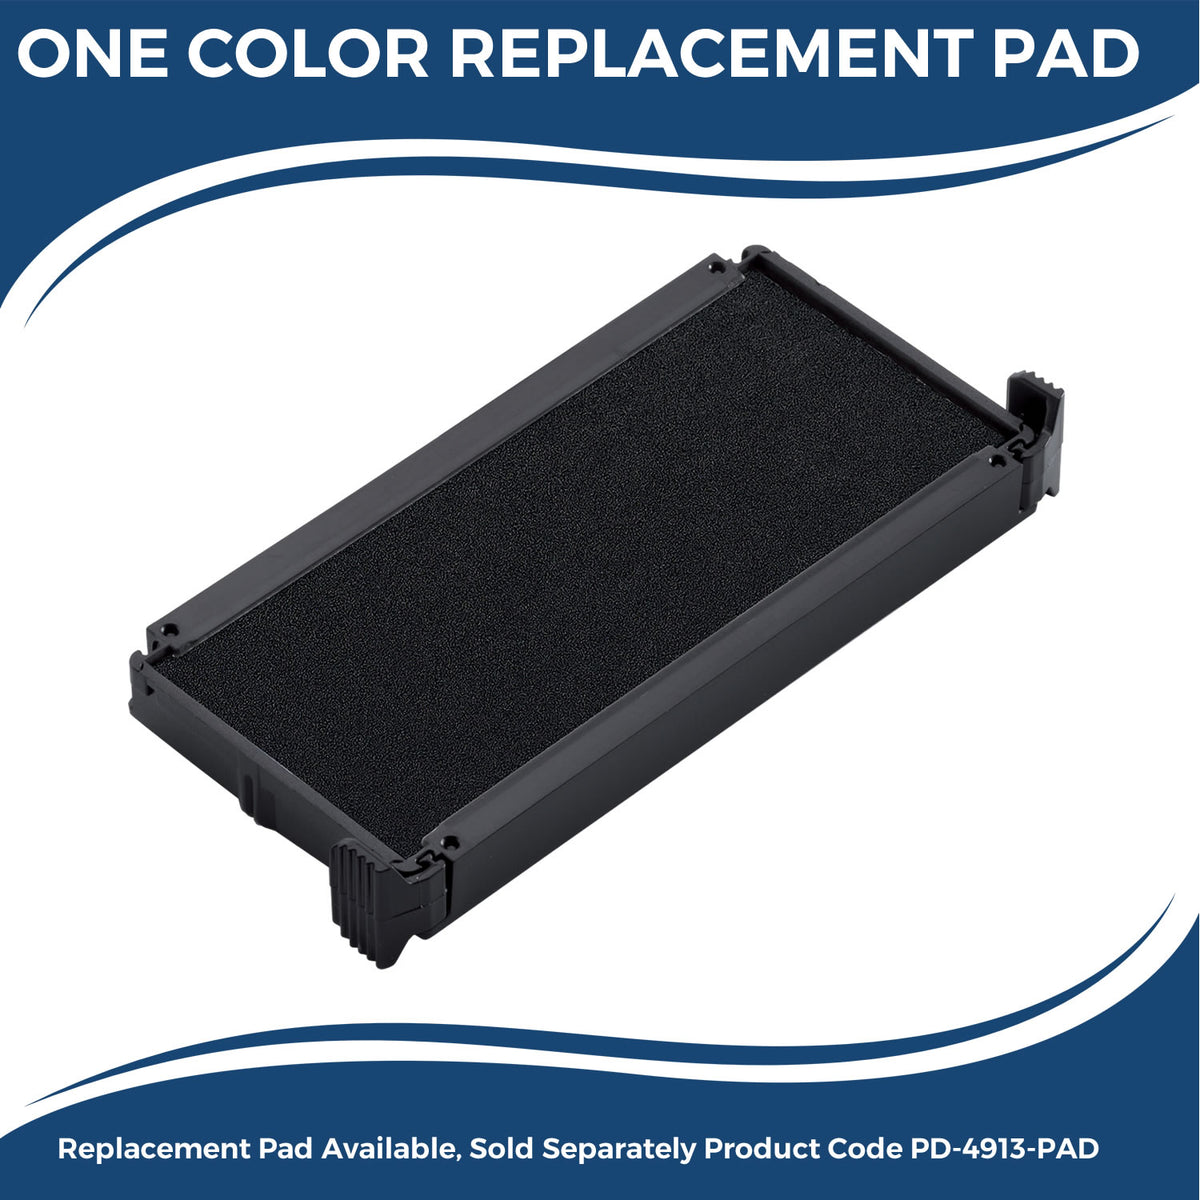 Large Self-Inking Bold Recibido Stamp 5541S Large Replacment Pad